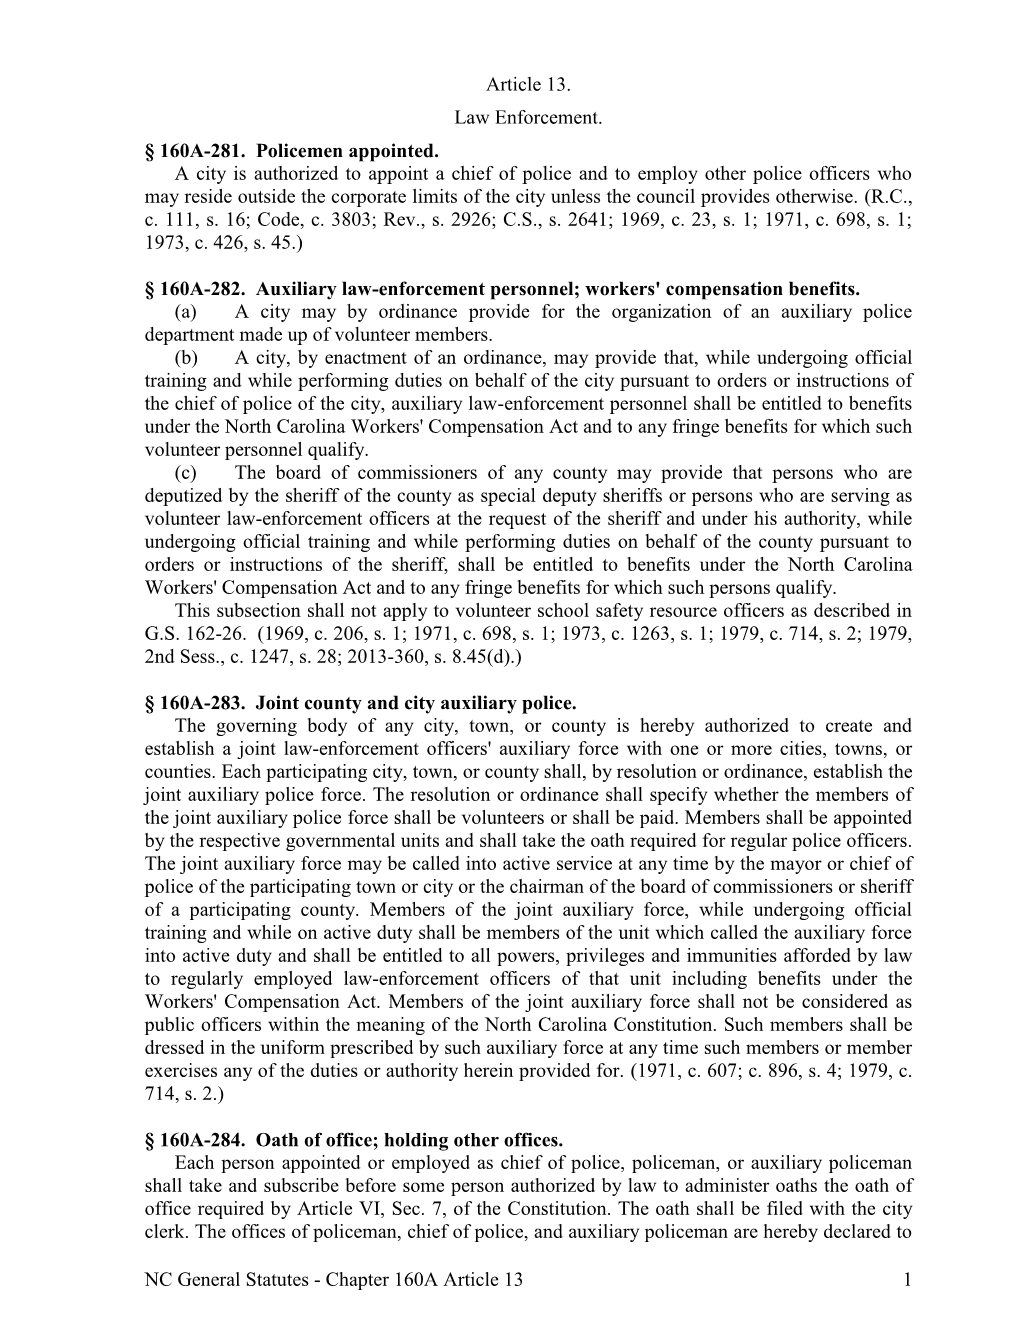 NC General Statutes - Chapter 160A Article 13 1